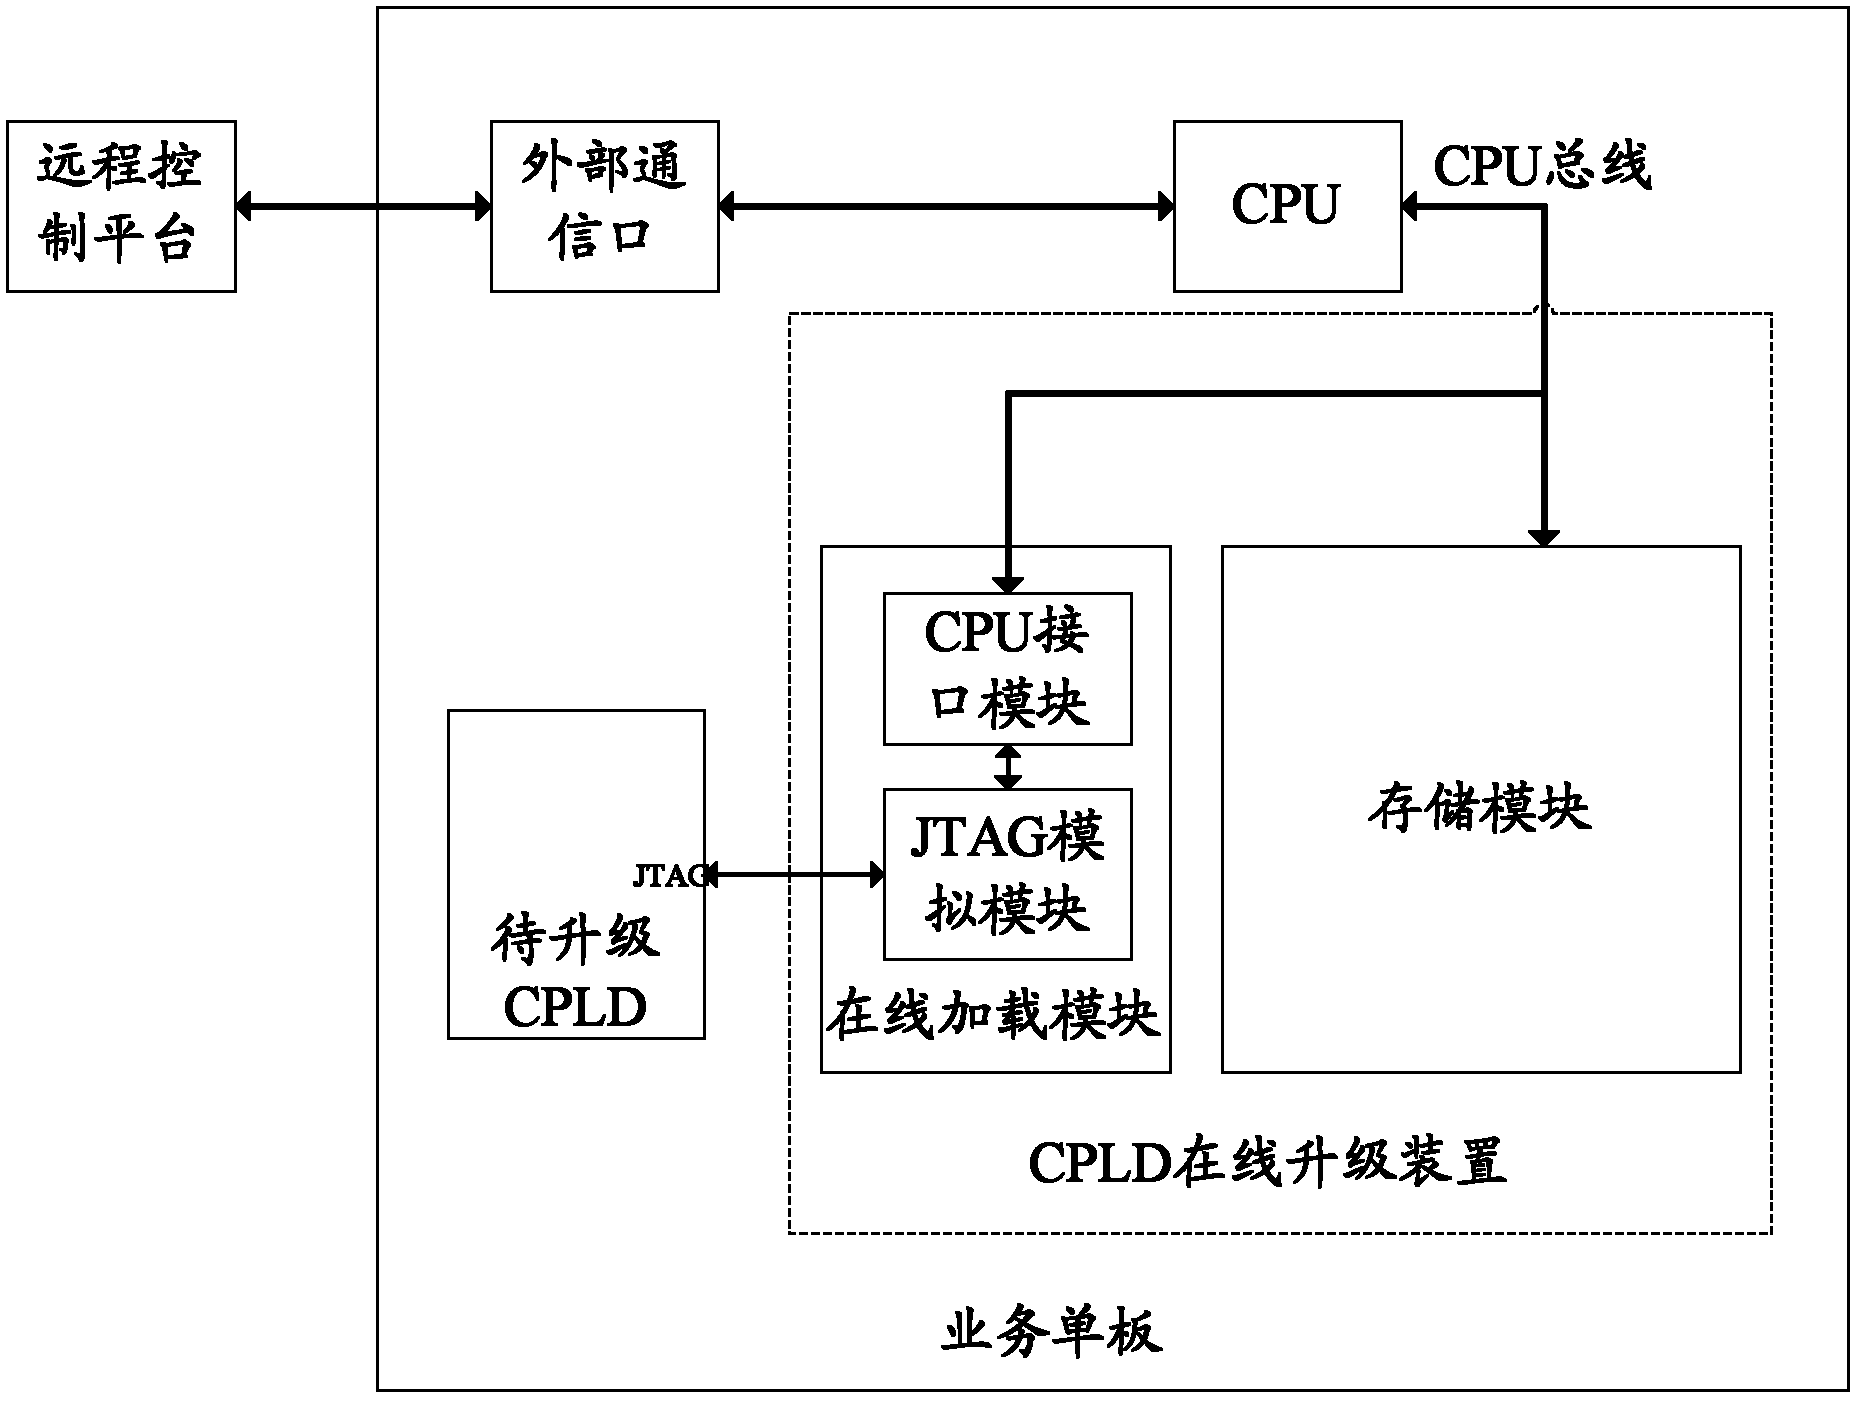 Online CPLD (Complex Programmable Logic Devices) upgrading method, device and business veneer